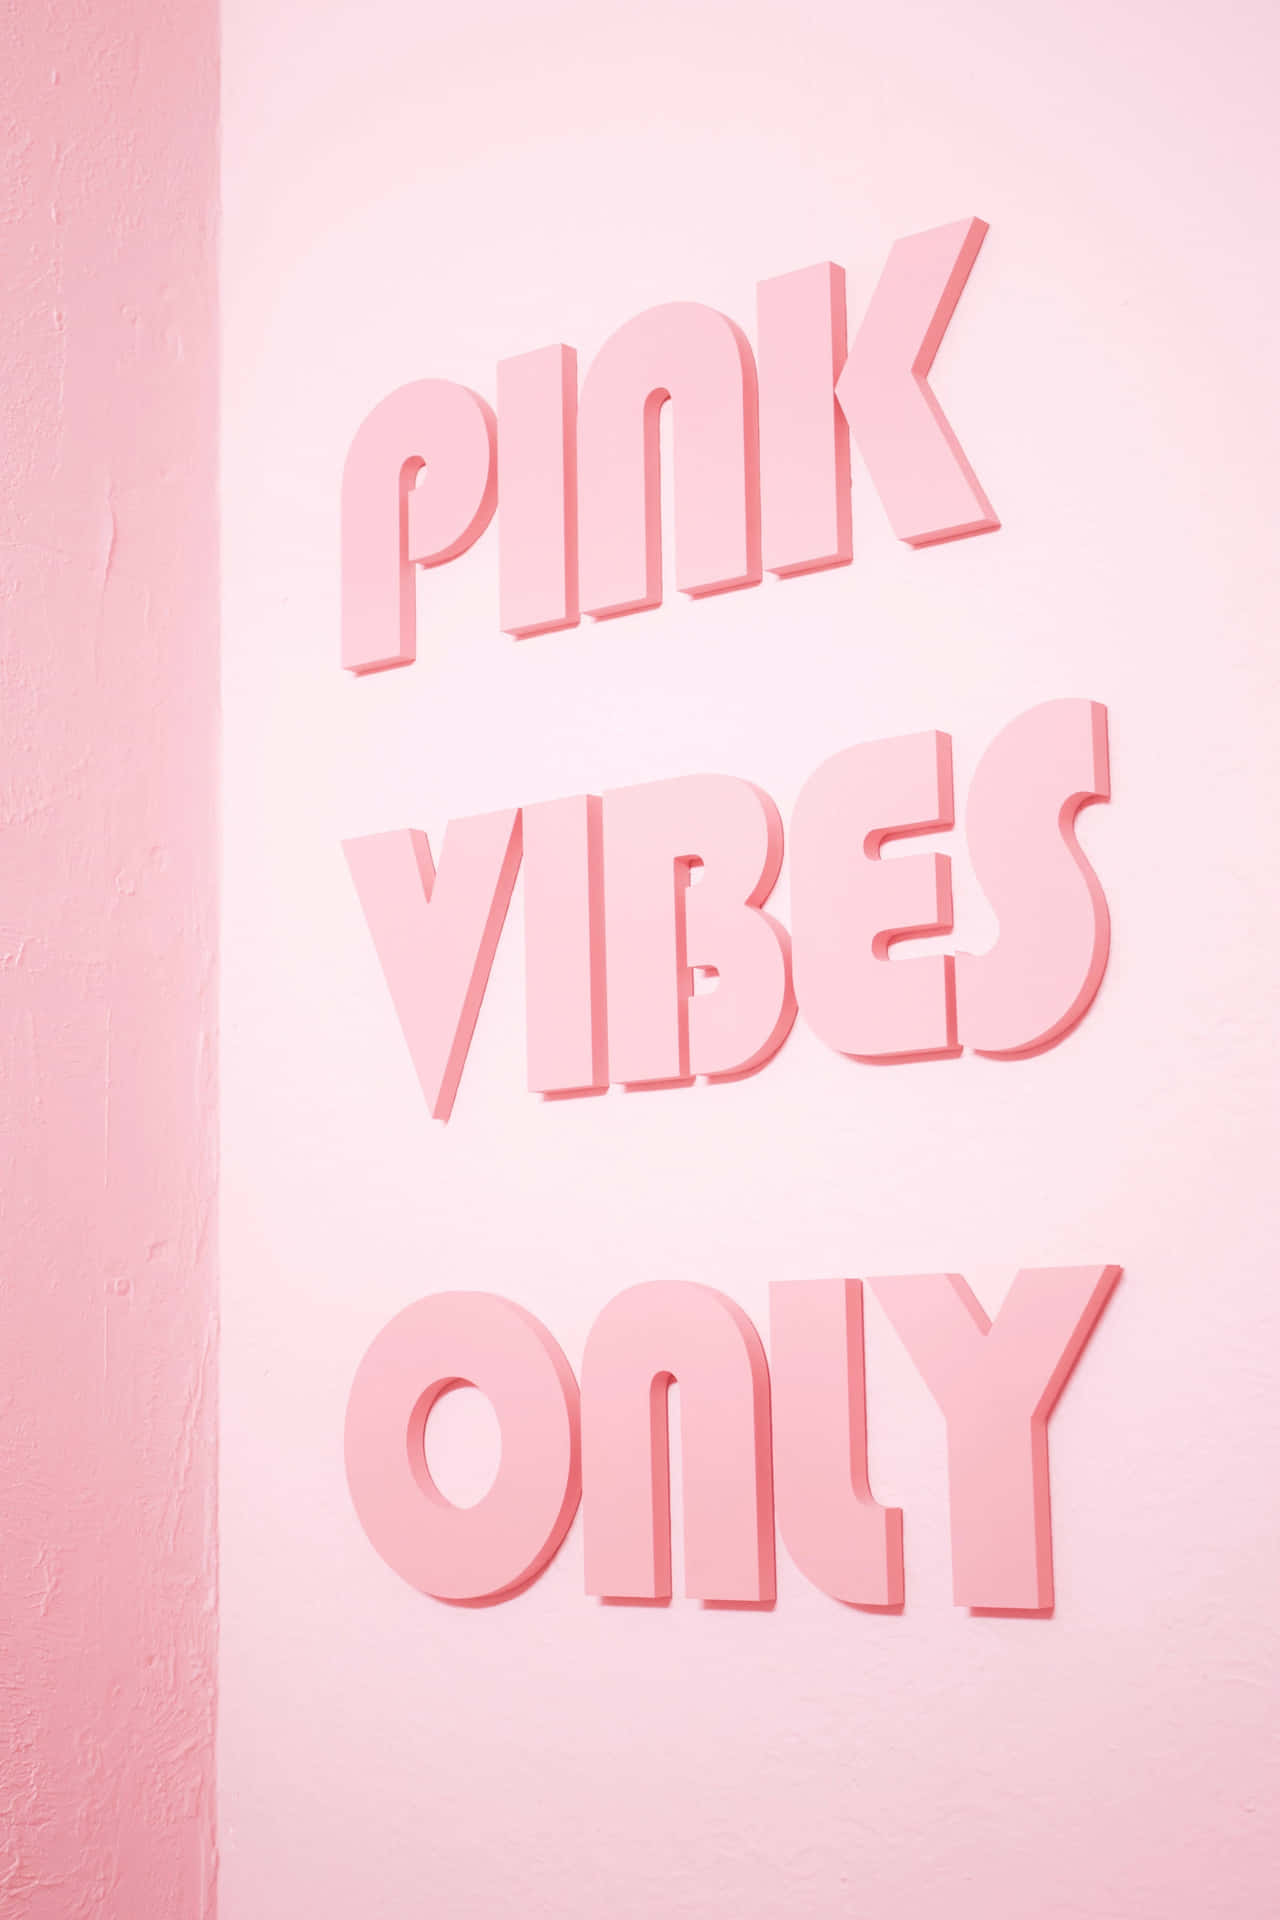 Pastel Pink Vibes Only Wall Art Wallpaper